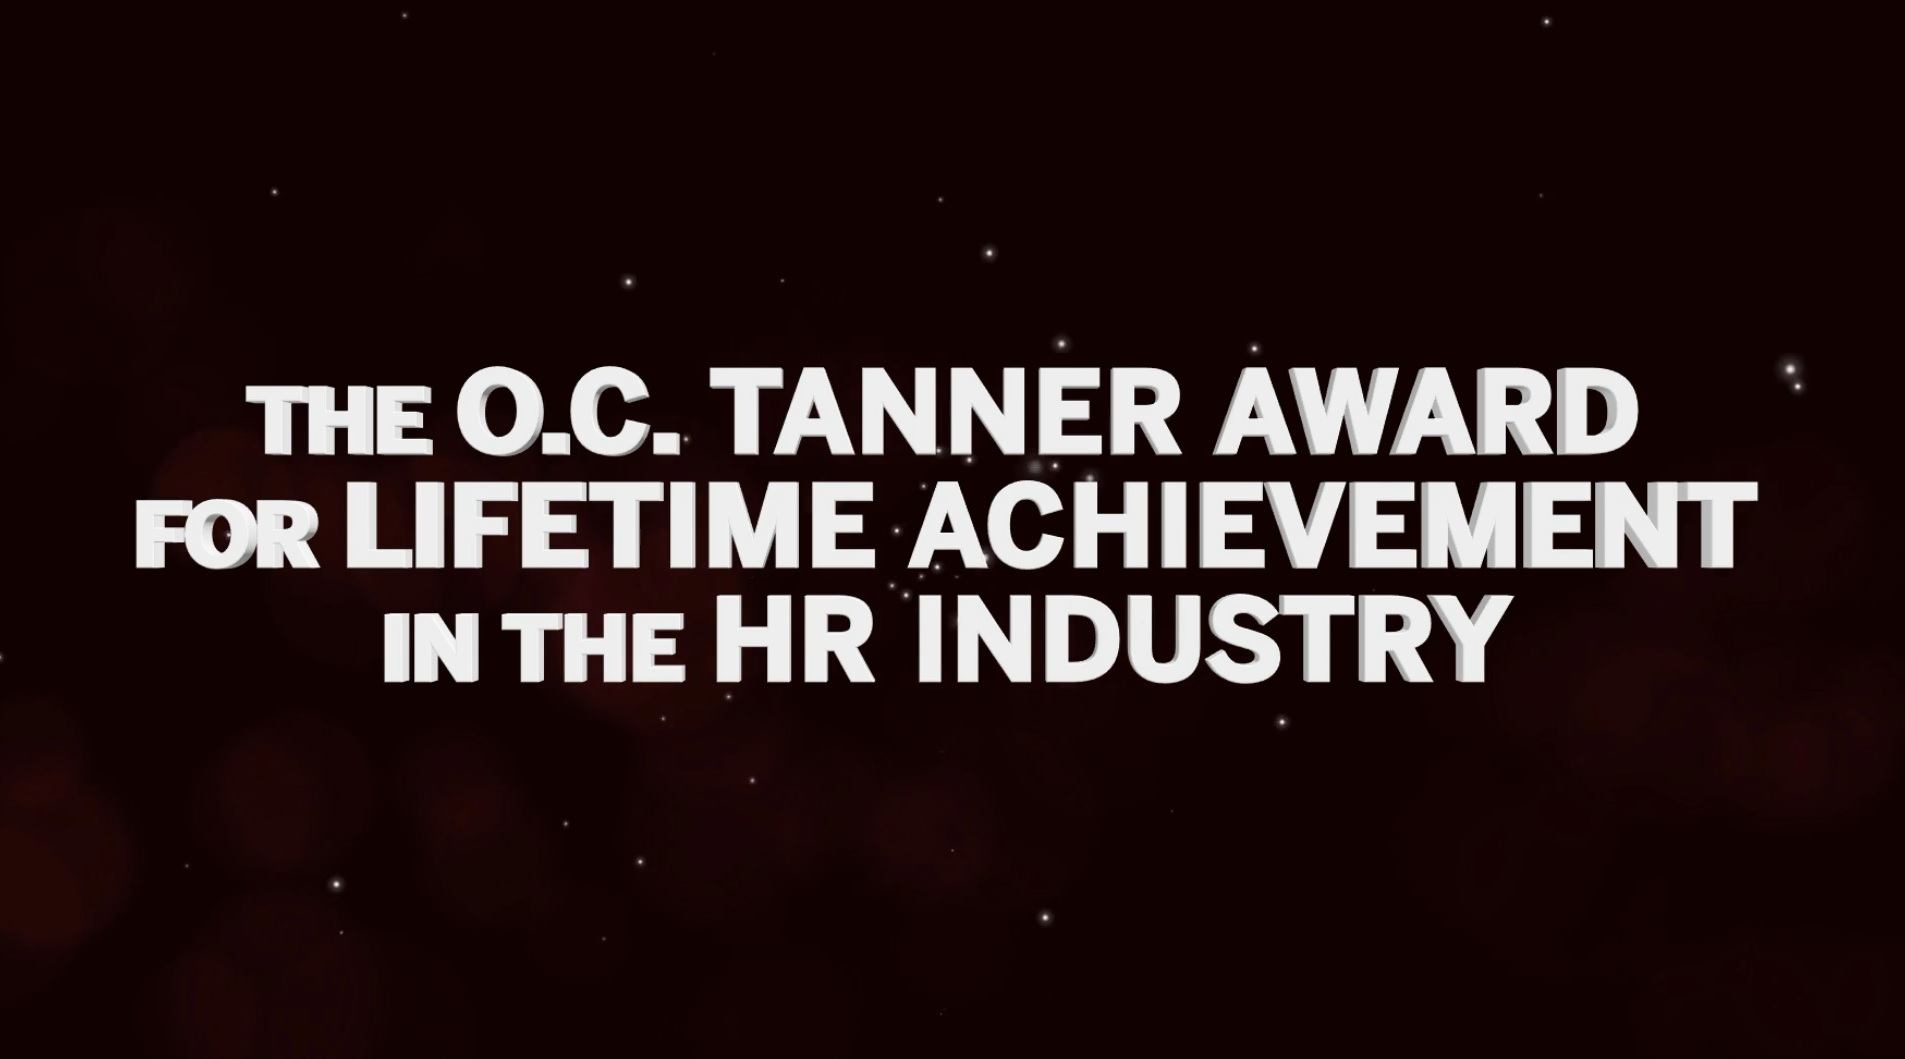 The O.C. Tanner award for lifetime achievement in the HR industry